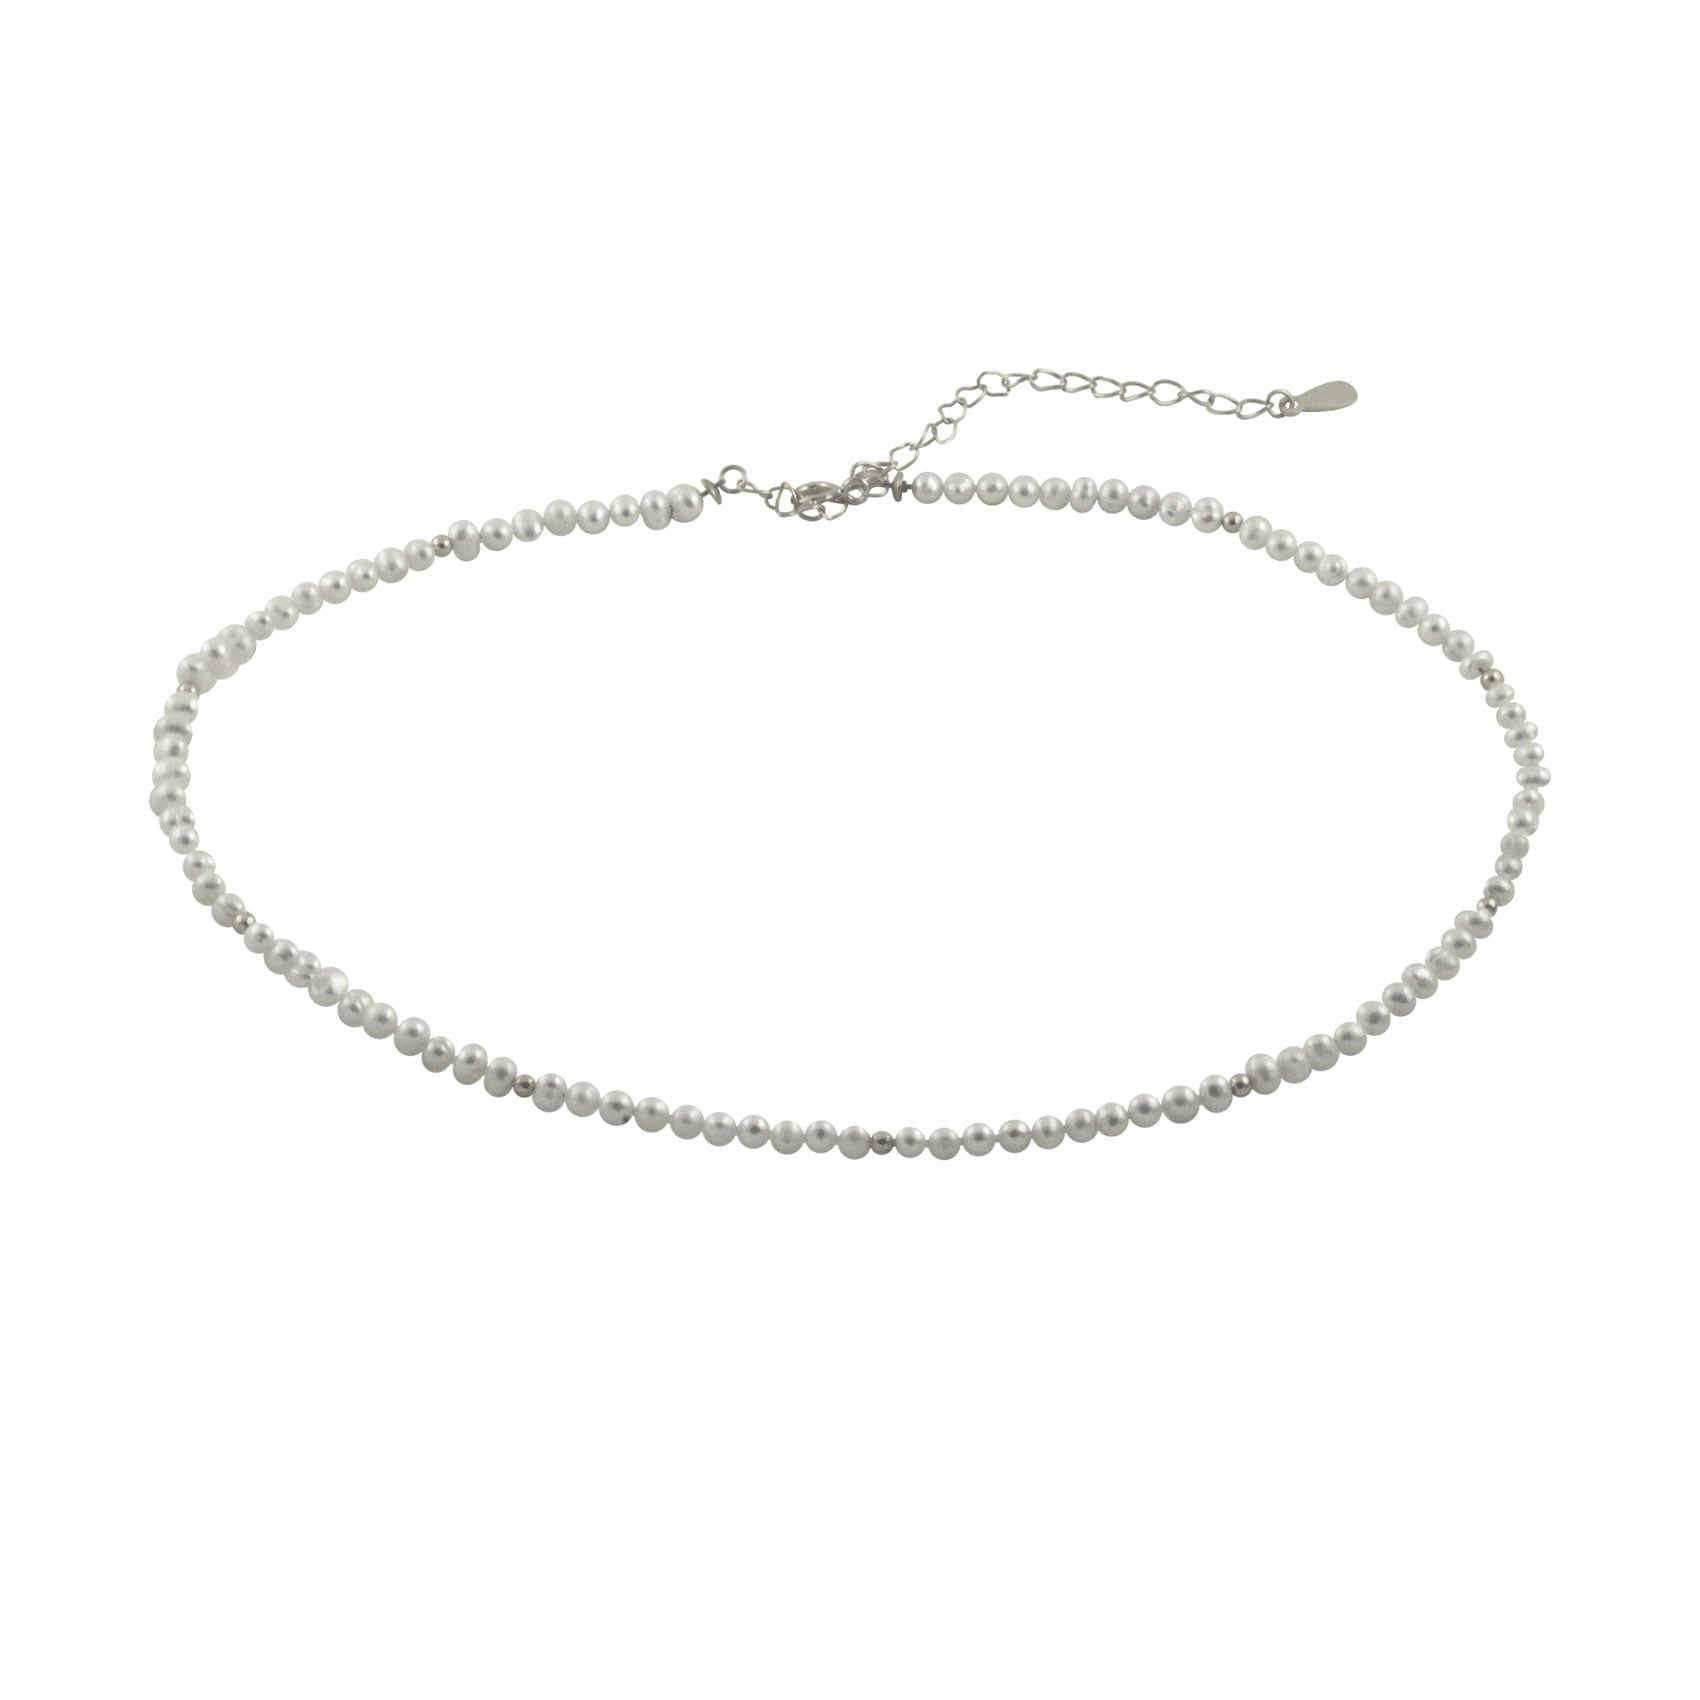 White Pearl Collar Necklace with Bead Accent